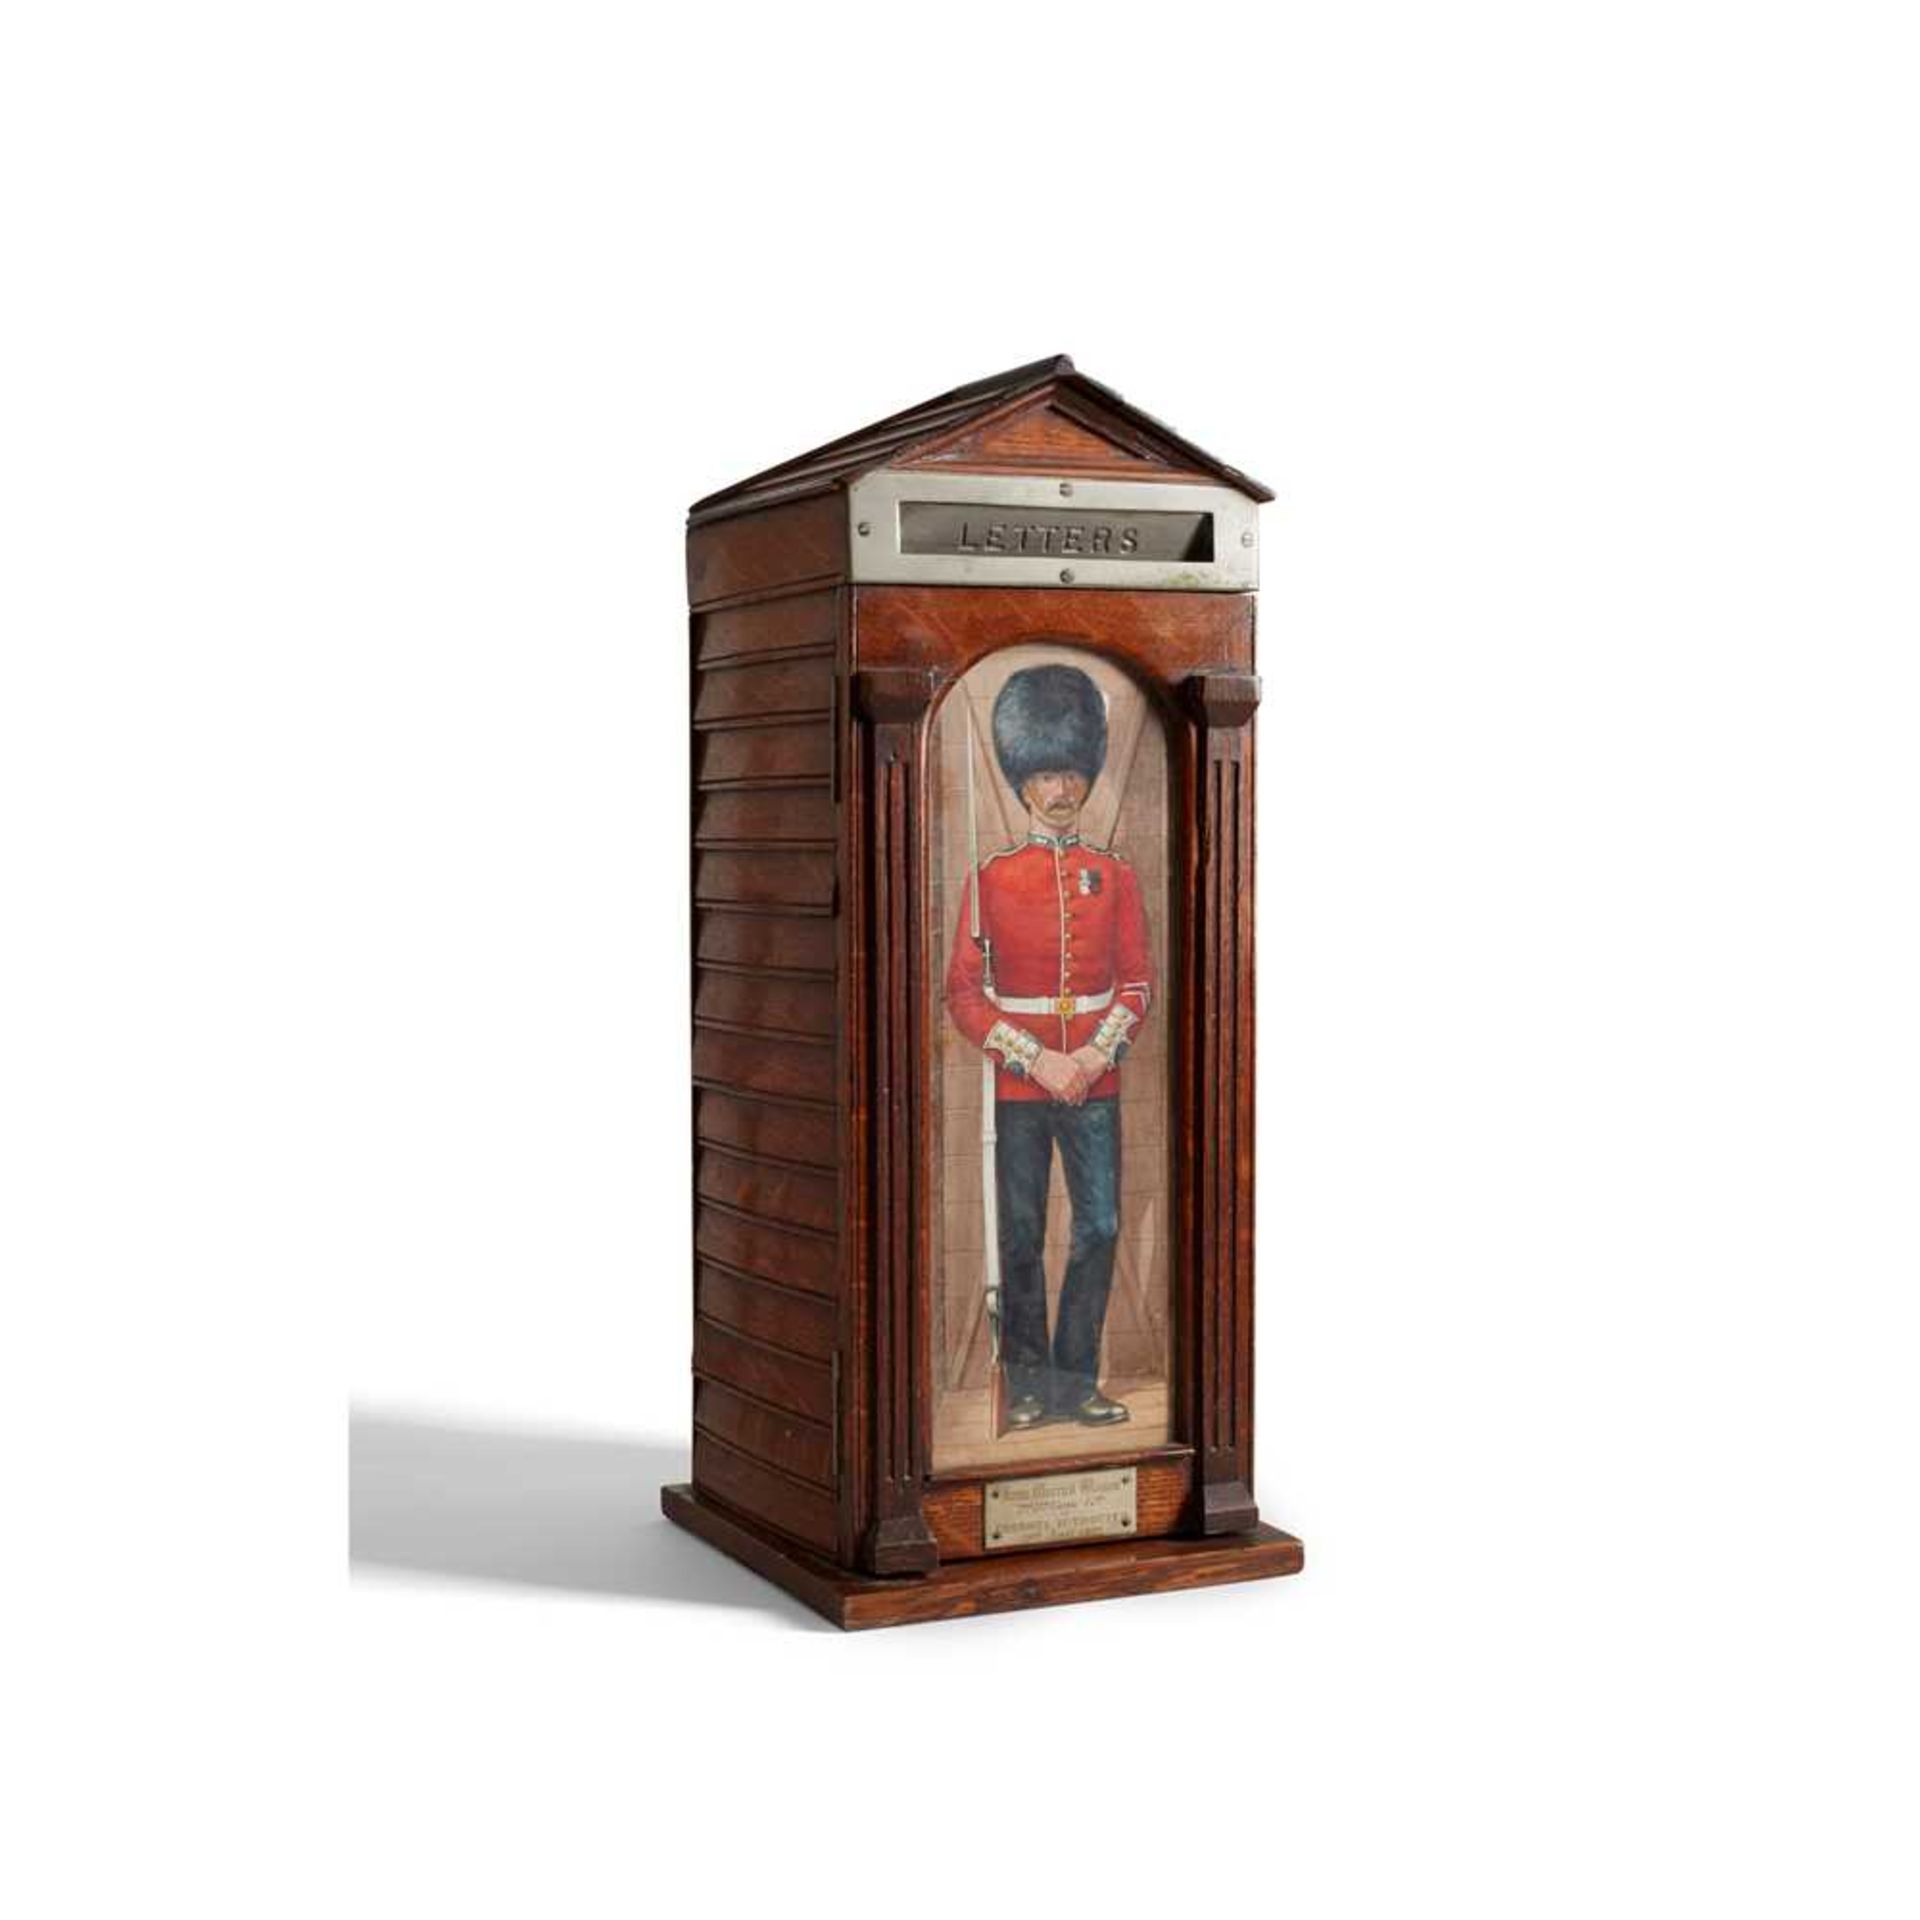 OAK POST BOX IN THE FORM OF A SENTRY BOX LATE 19TH CENTURY